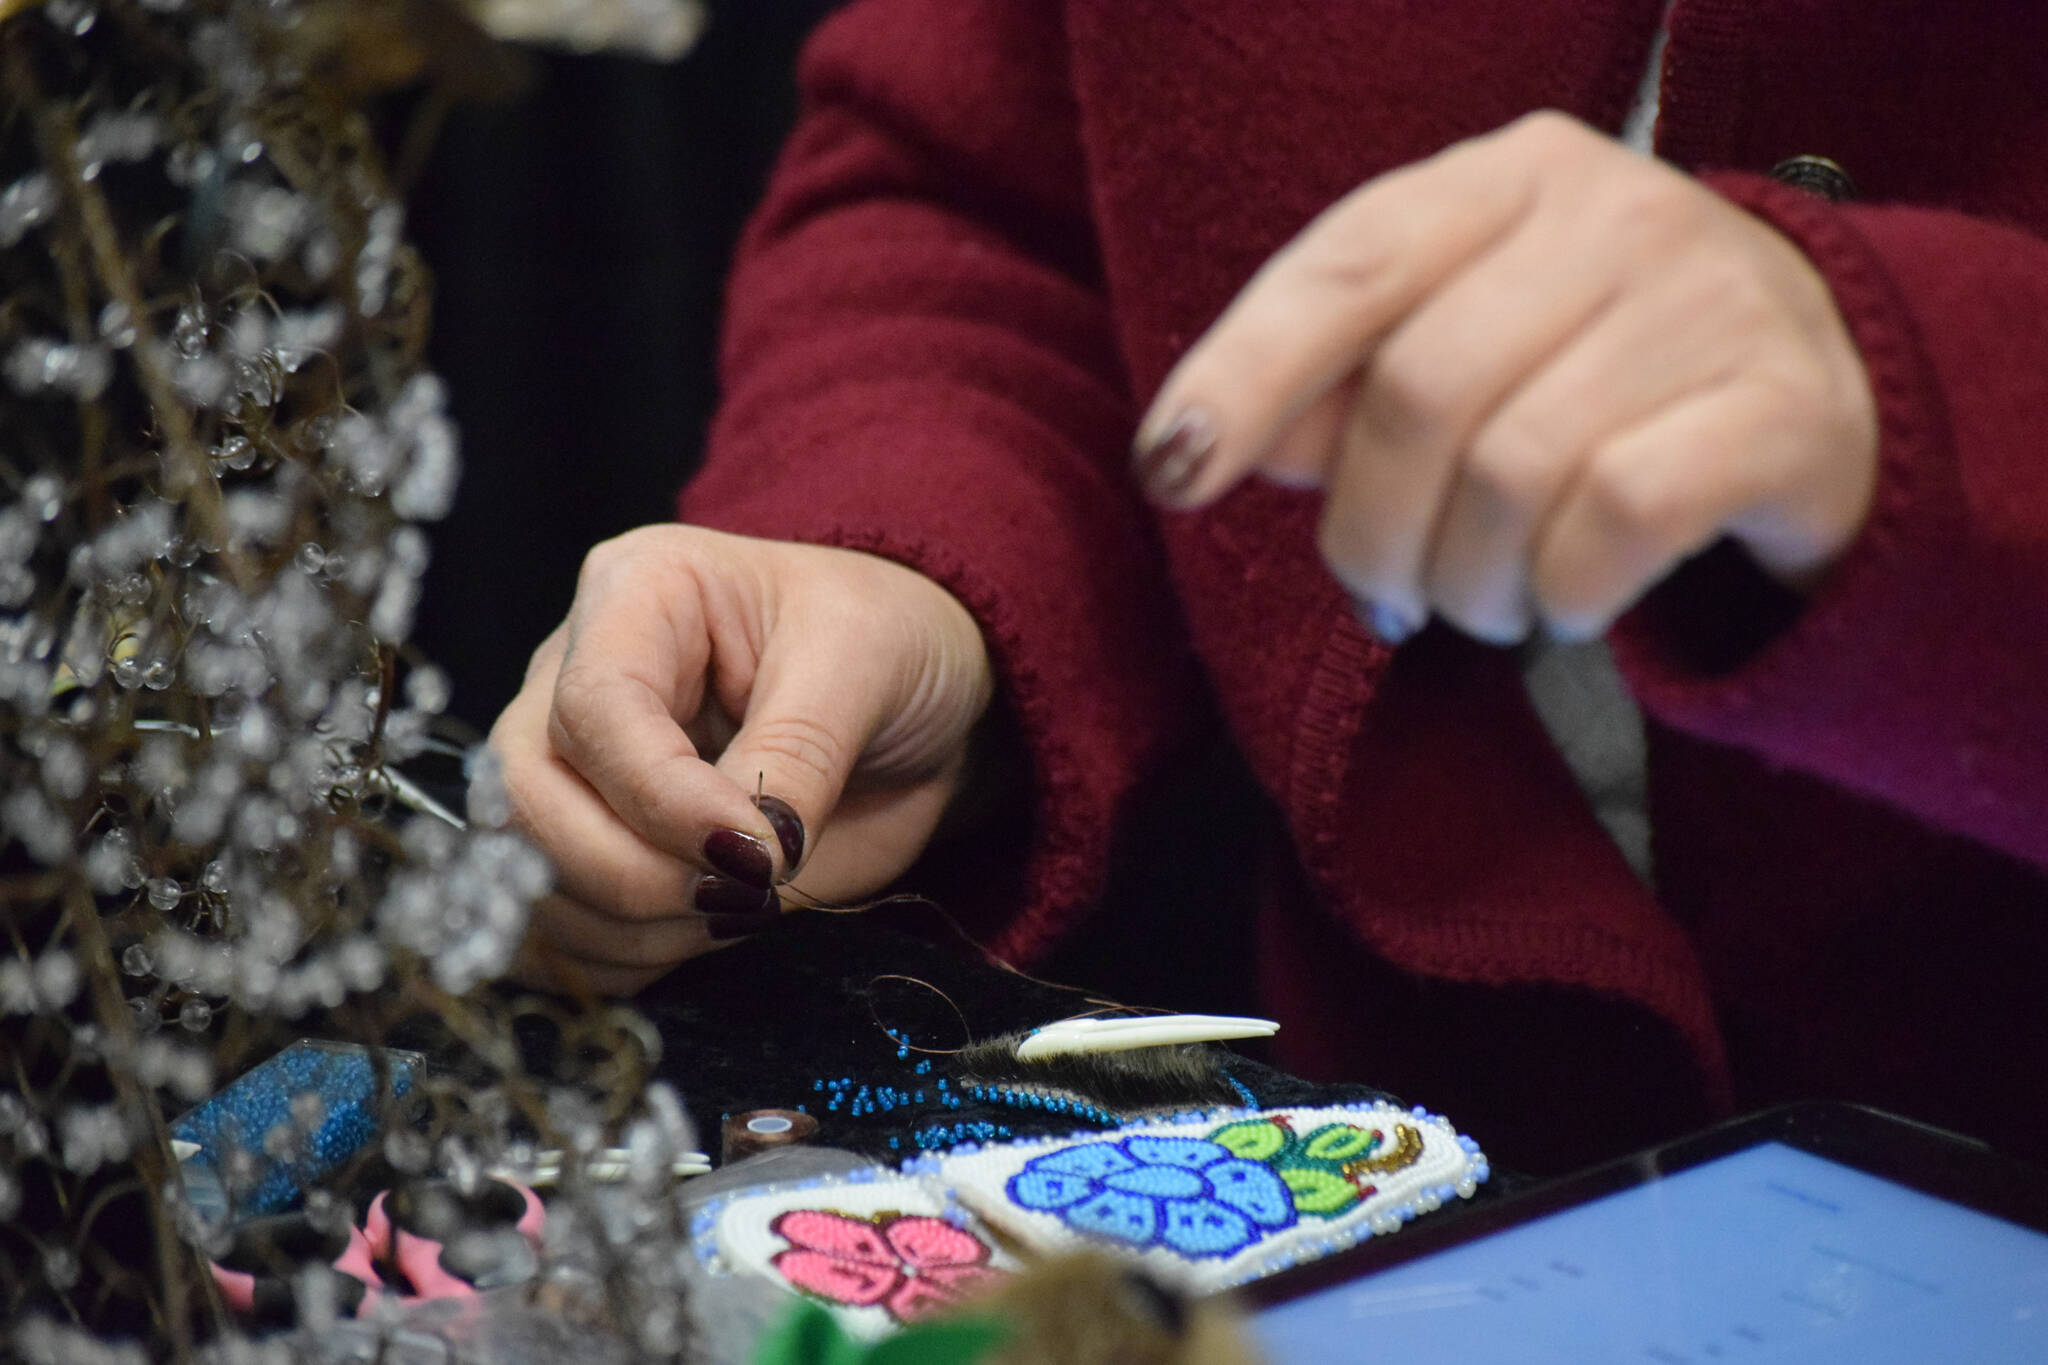 Michelle Ravenmoon sews a beaded artisan product at the Soldotna Holiday Bazaar at the Soldotna Regional Sports Complex on Saturday, Nov. 20, 2021. (Camille Botello/Peninsula Clarion)